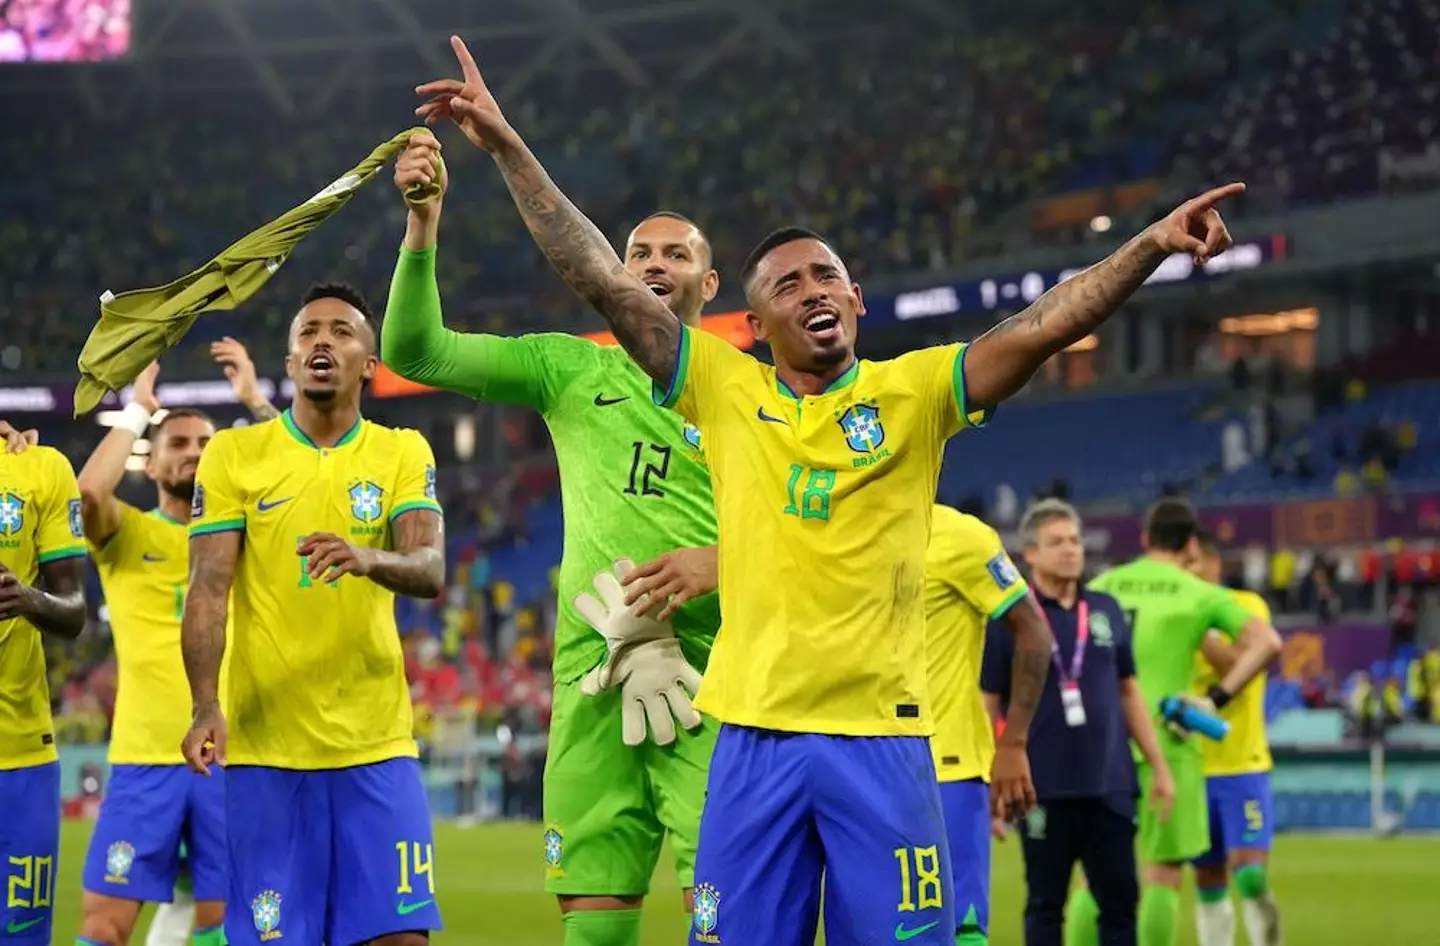 Brazil just became the second team after France to qualify for World Cup's Round of 16 stage.